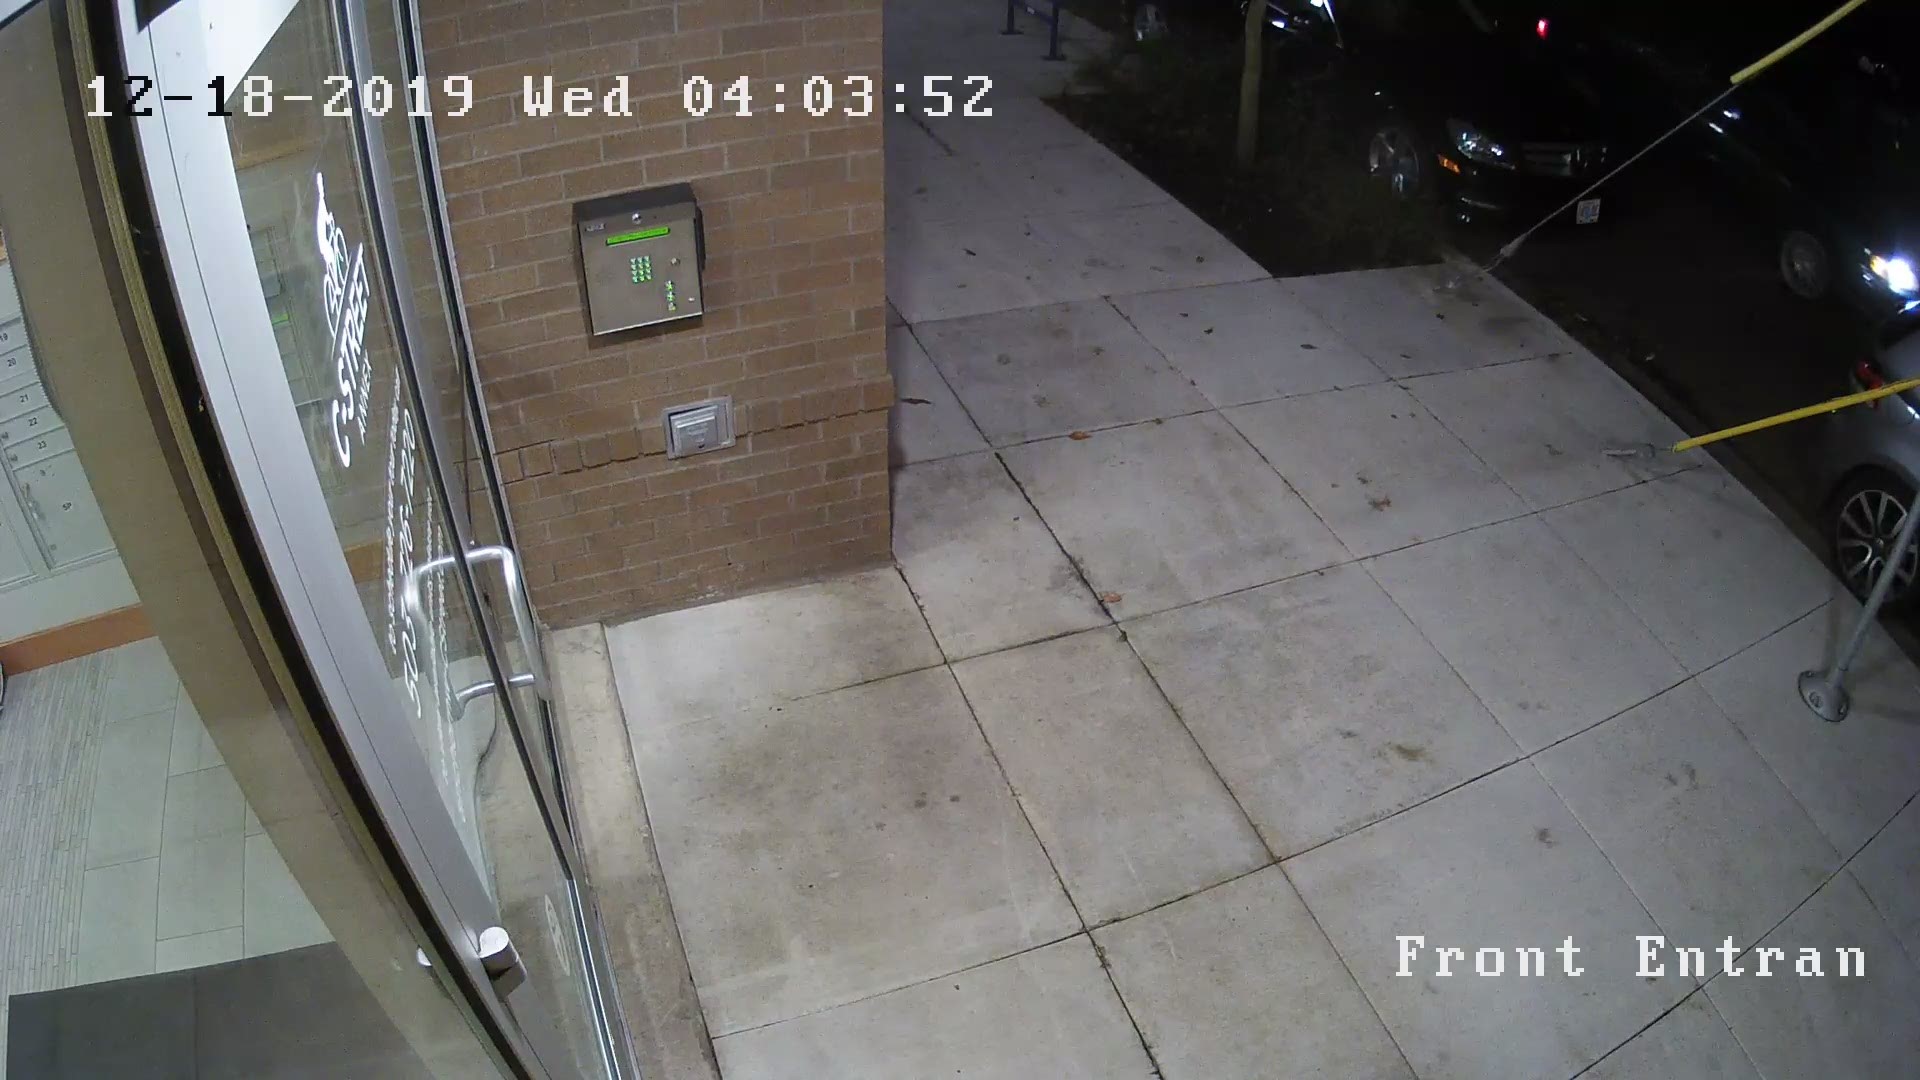 Surveillance video provided by Anchor NW Property Group